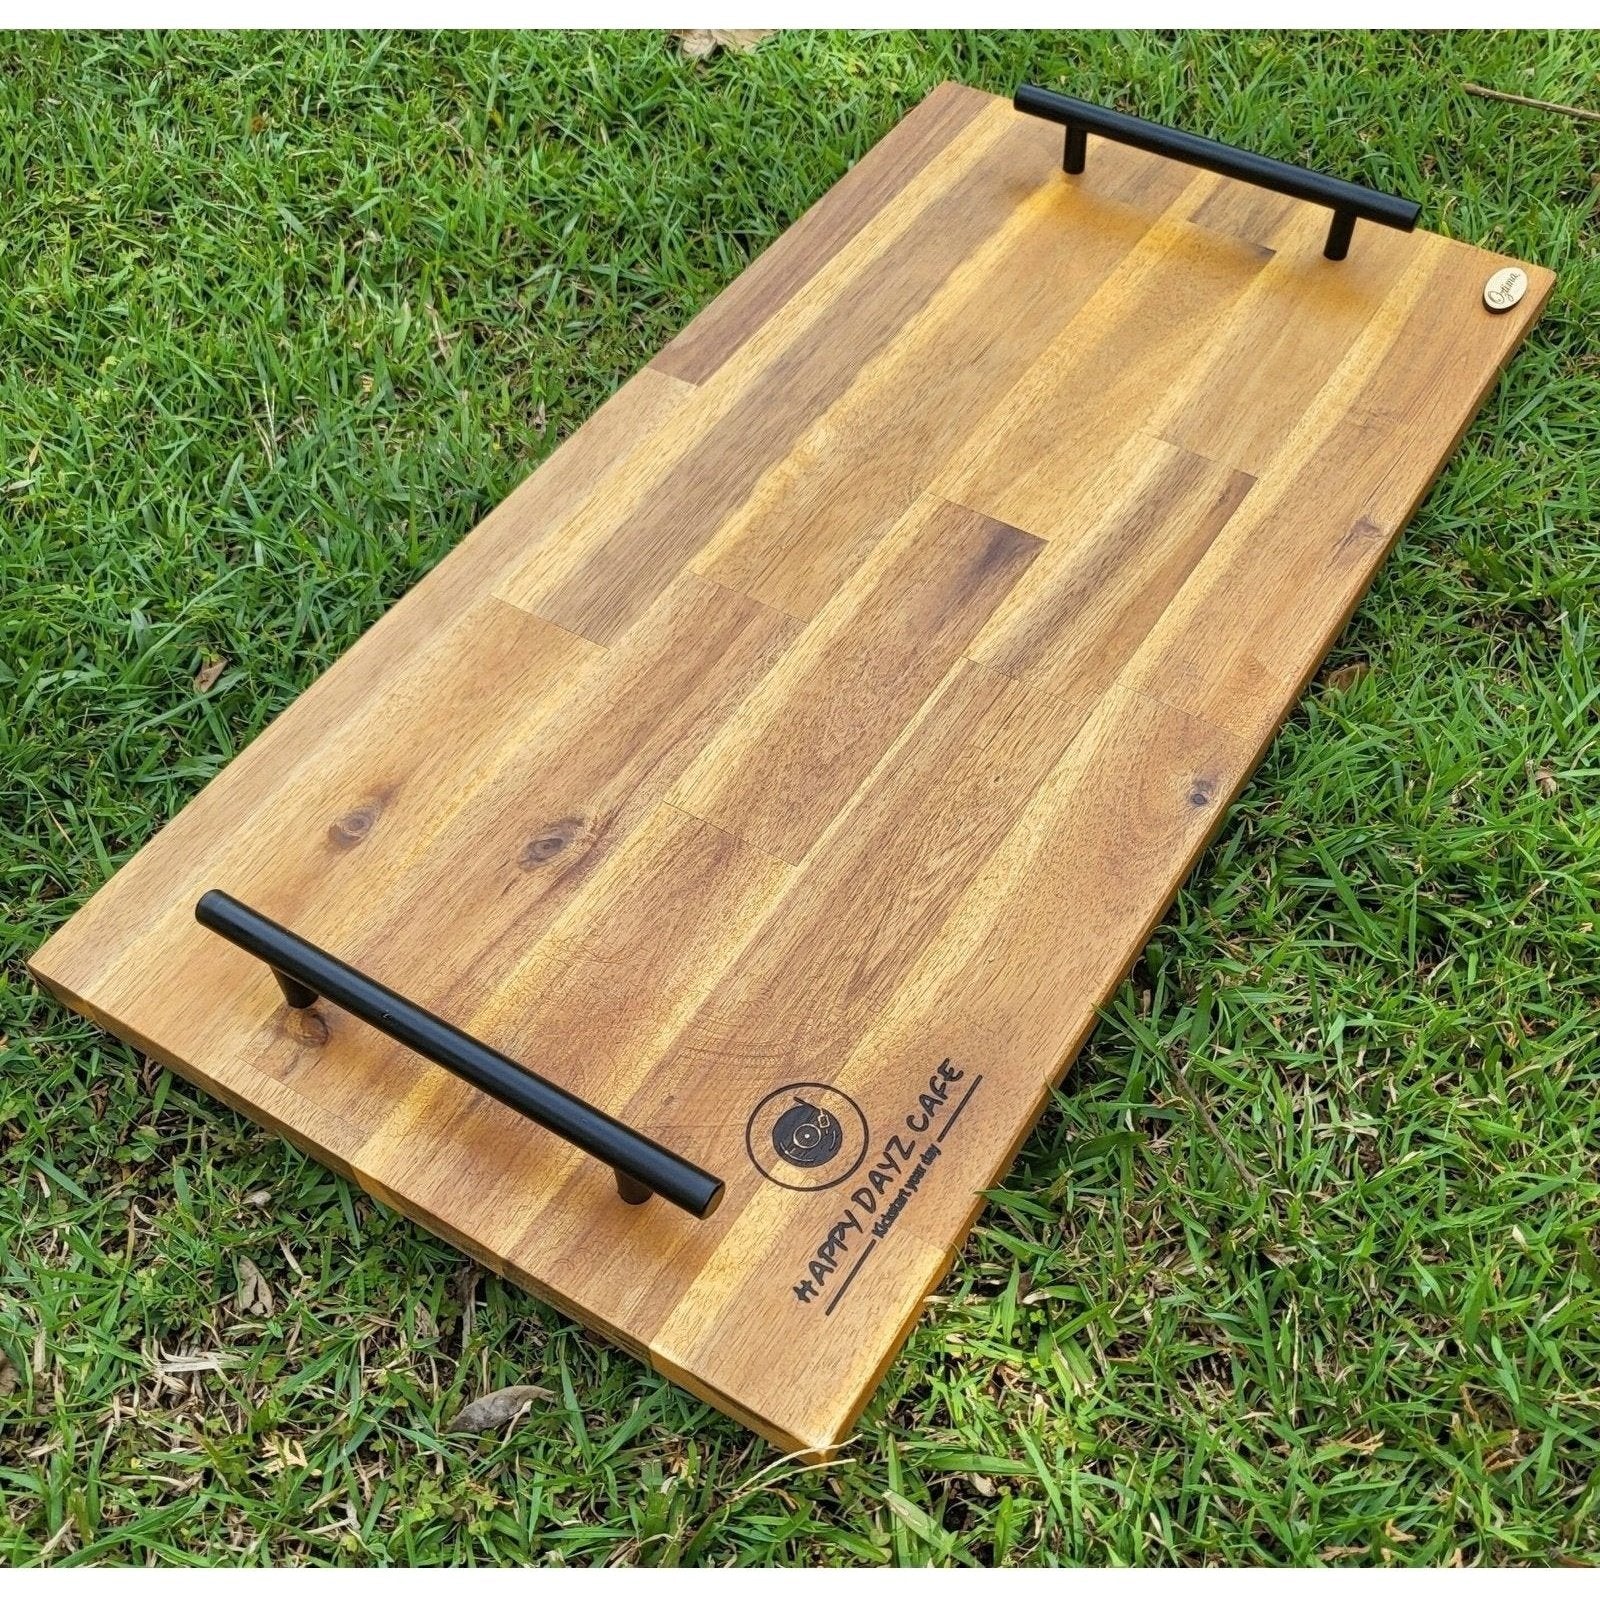 Grazing Board / Serving Platter with Handles 600mm x 300mm - AMD Touring